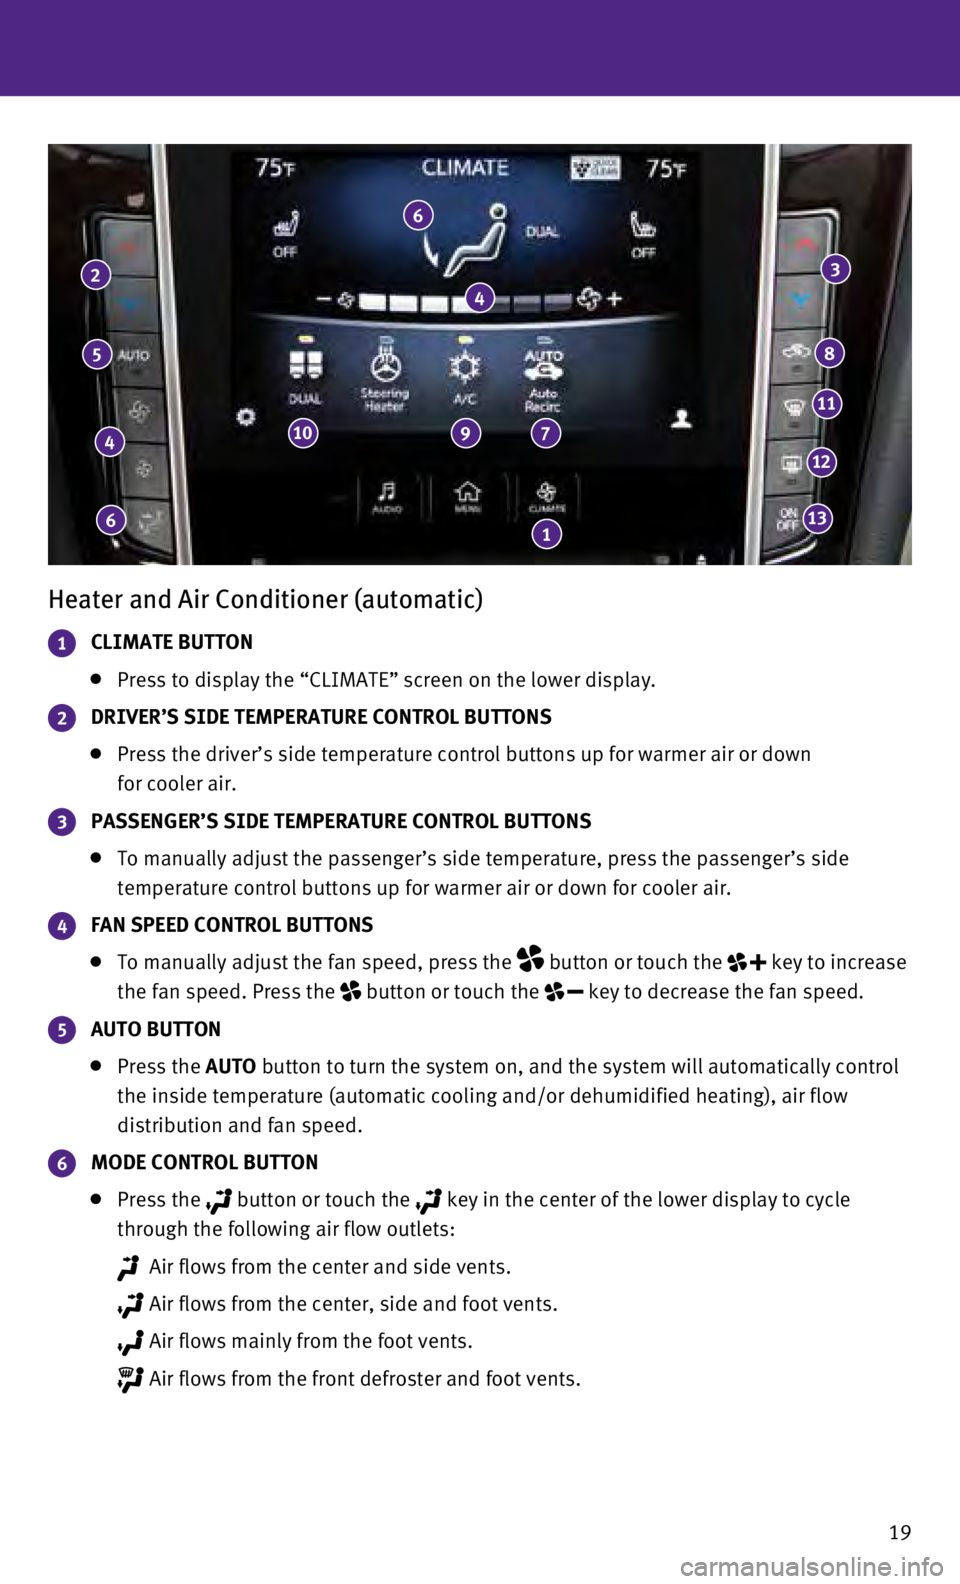 INFINITI Q50 HYBRID 2016  Quick Reference Guide 19
Heater and Air Conditioner (automatic)
1 CLIMATE BUTTON
   Press to display the “CLIMATE” screen on the lower display.
2 DRIVER’S SIDE TEMPERATURE CONTROL BUTTONS
     Press the driver’s si